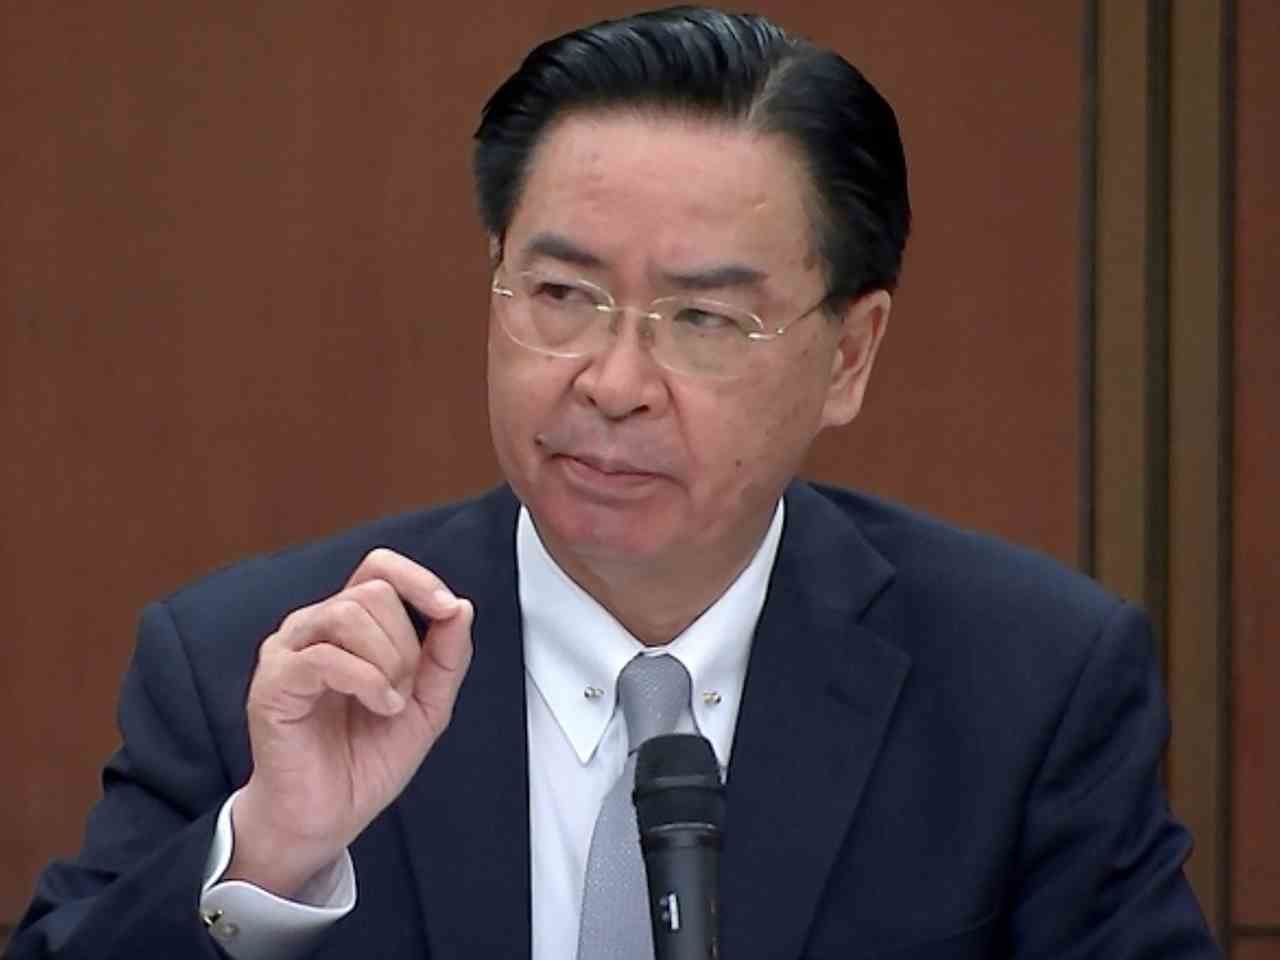 aiwanese Foreign Minister Joseph Wu speaks during a briefing Wednesday, April 7, 2021, in Taipei, Taiwan.